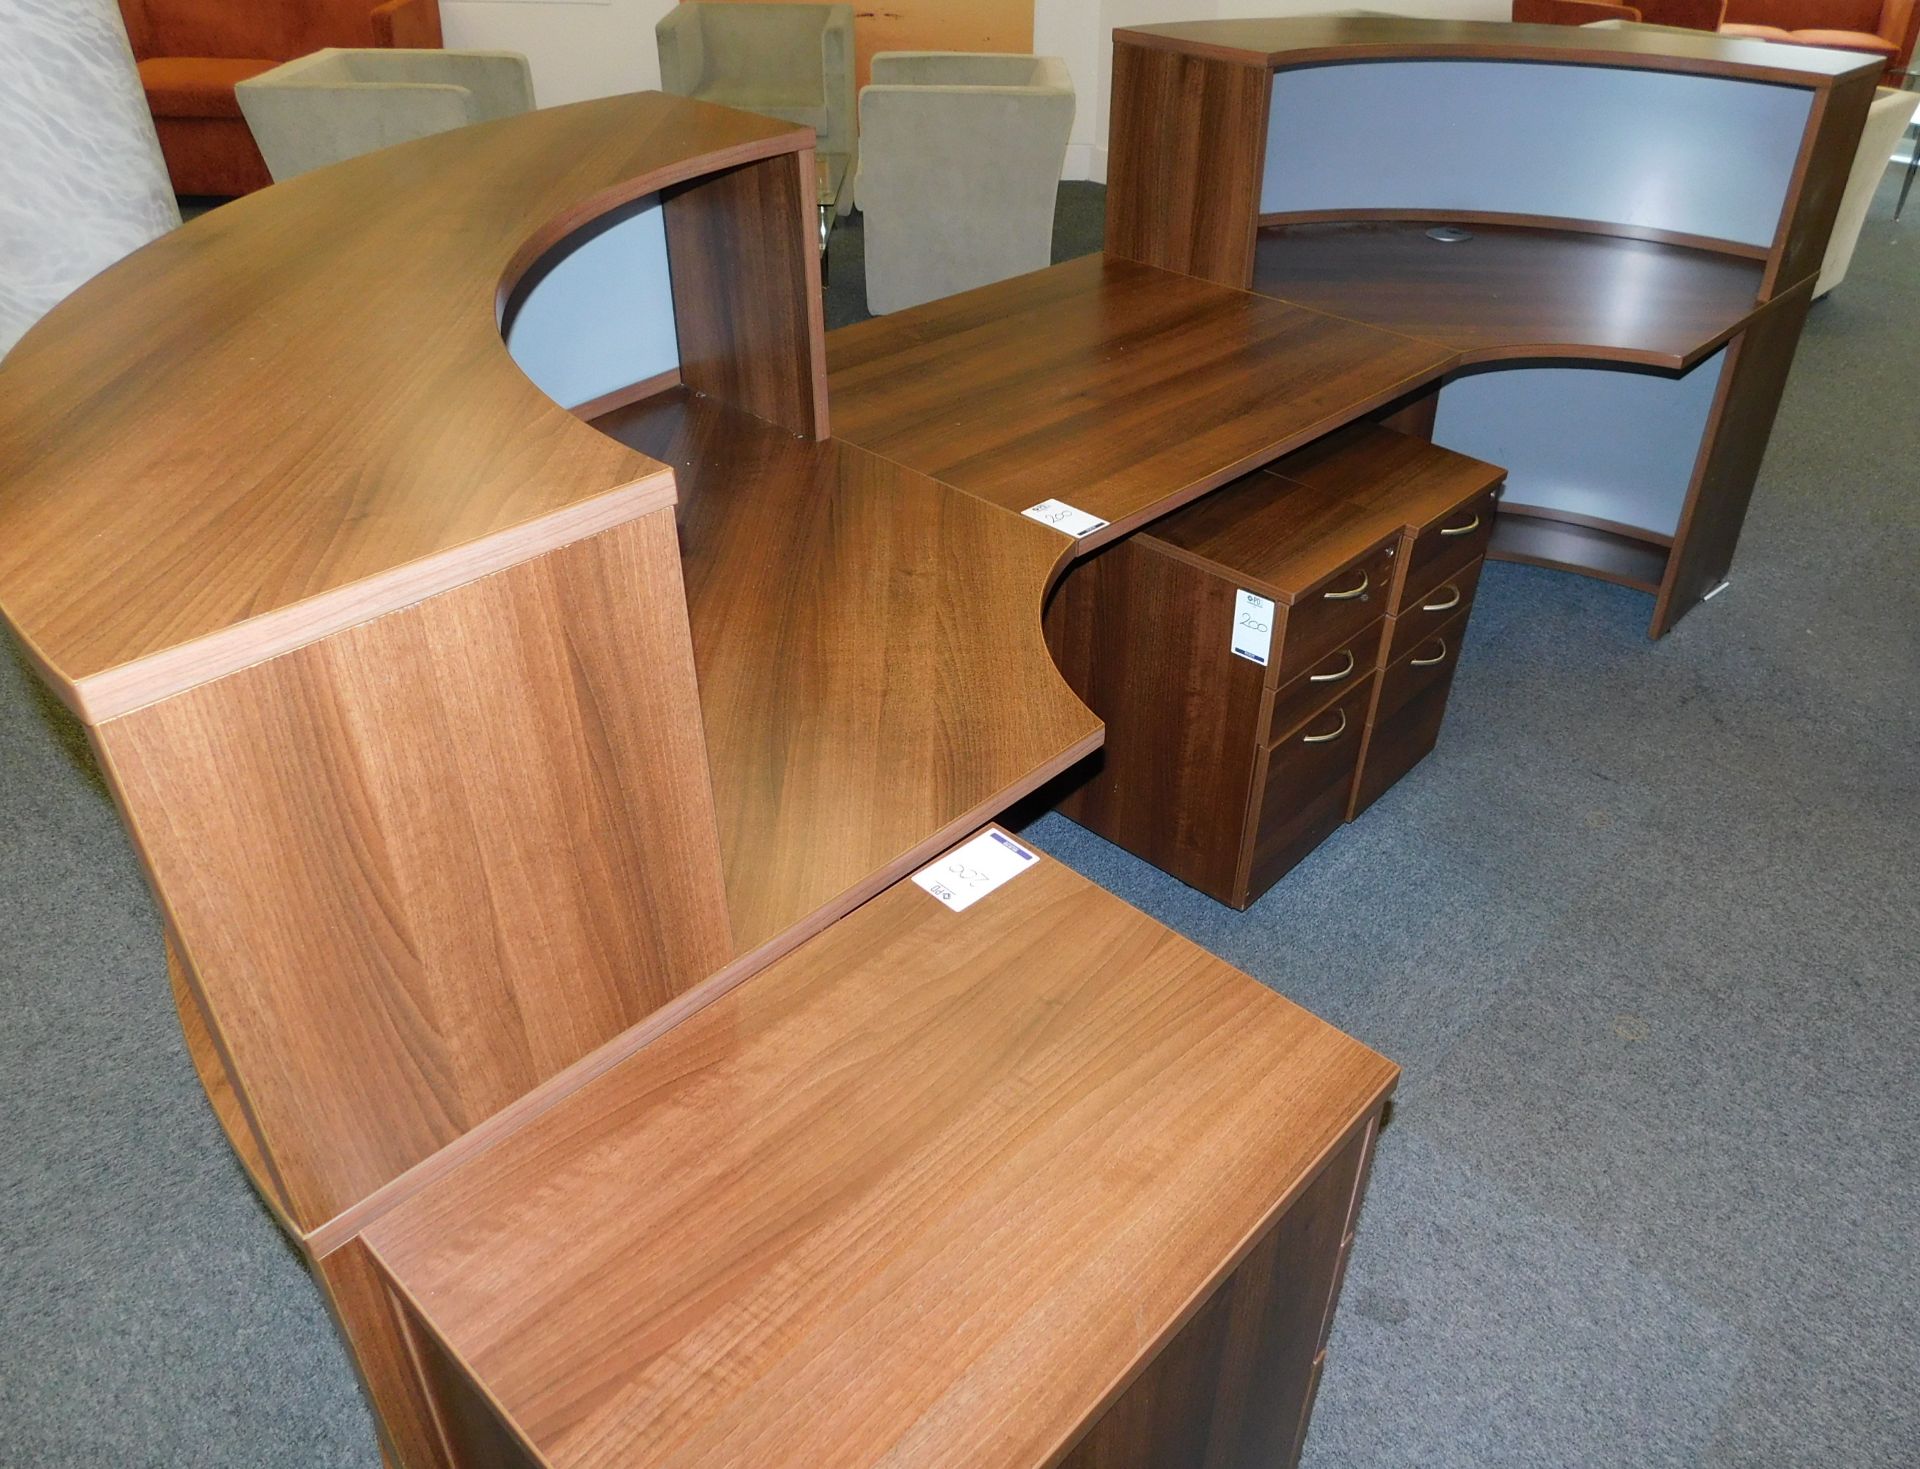 American Walnut Effect Demi-Lune Shaped Banded Reception Desk with three 3-Drawer pedestals (Located - Image 5 of 5